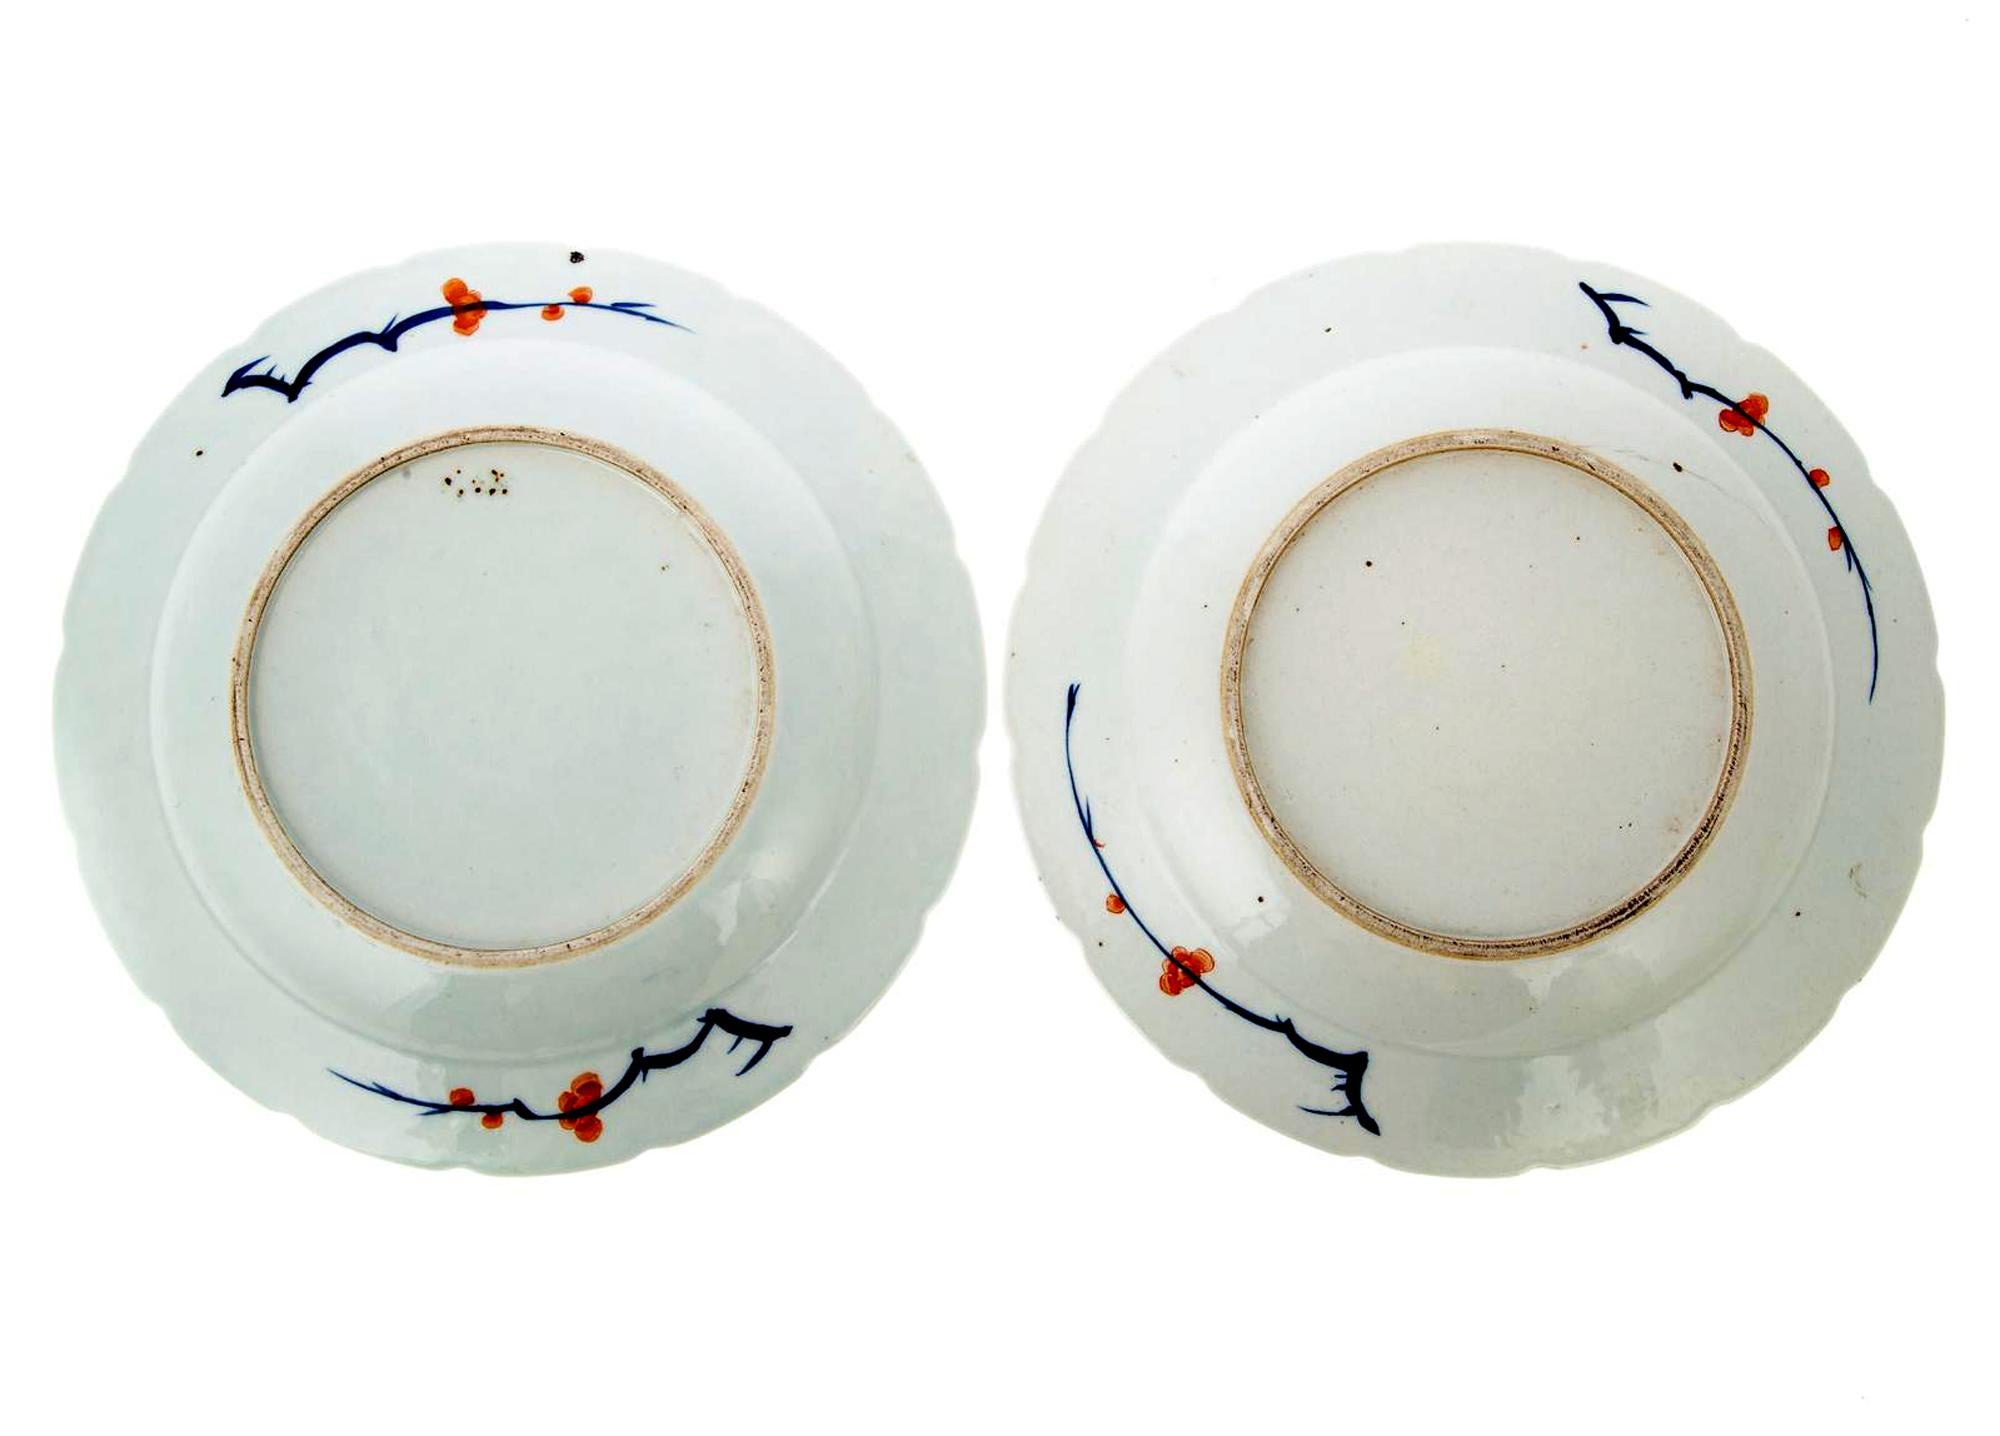 18th Century Chinese Export Porcelain Tobacco Leaf Plates